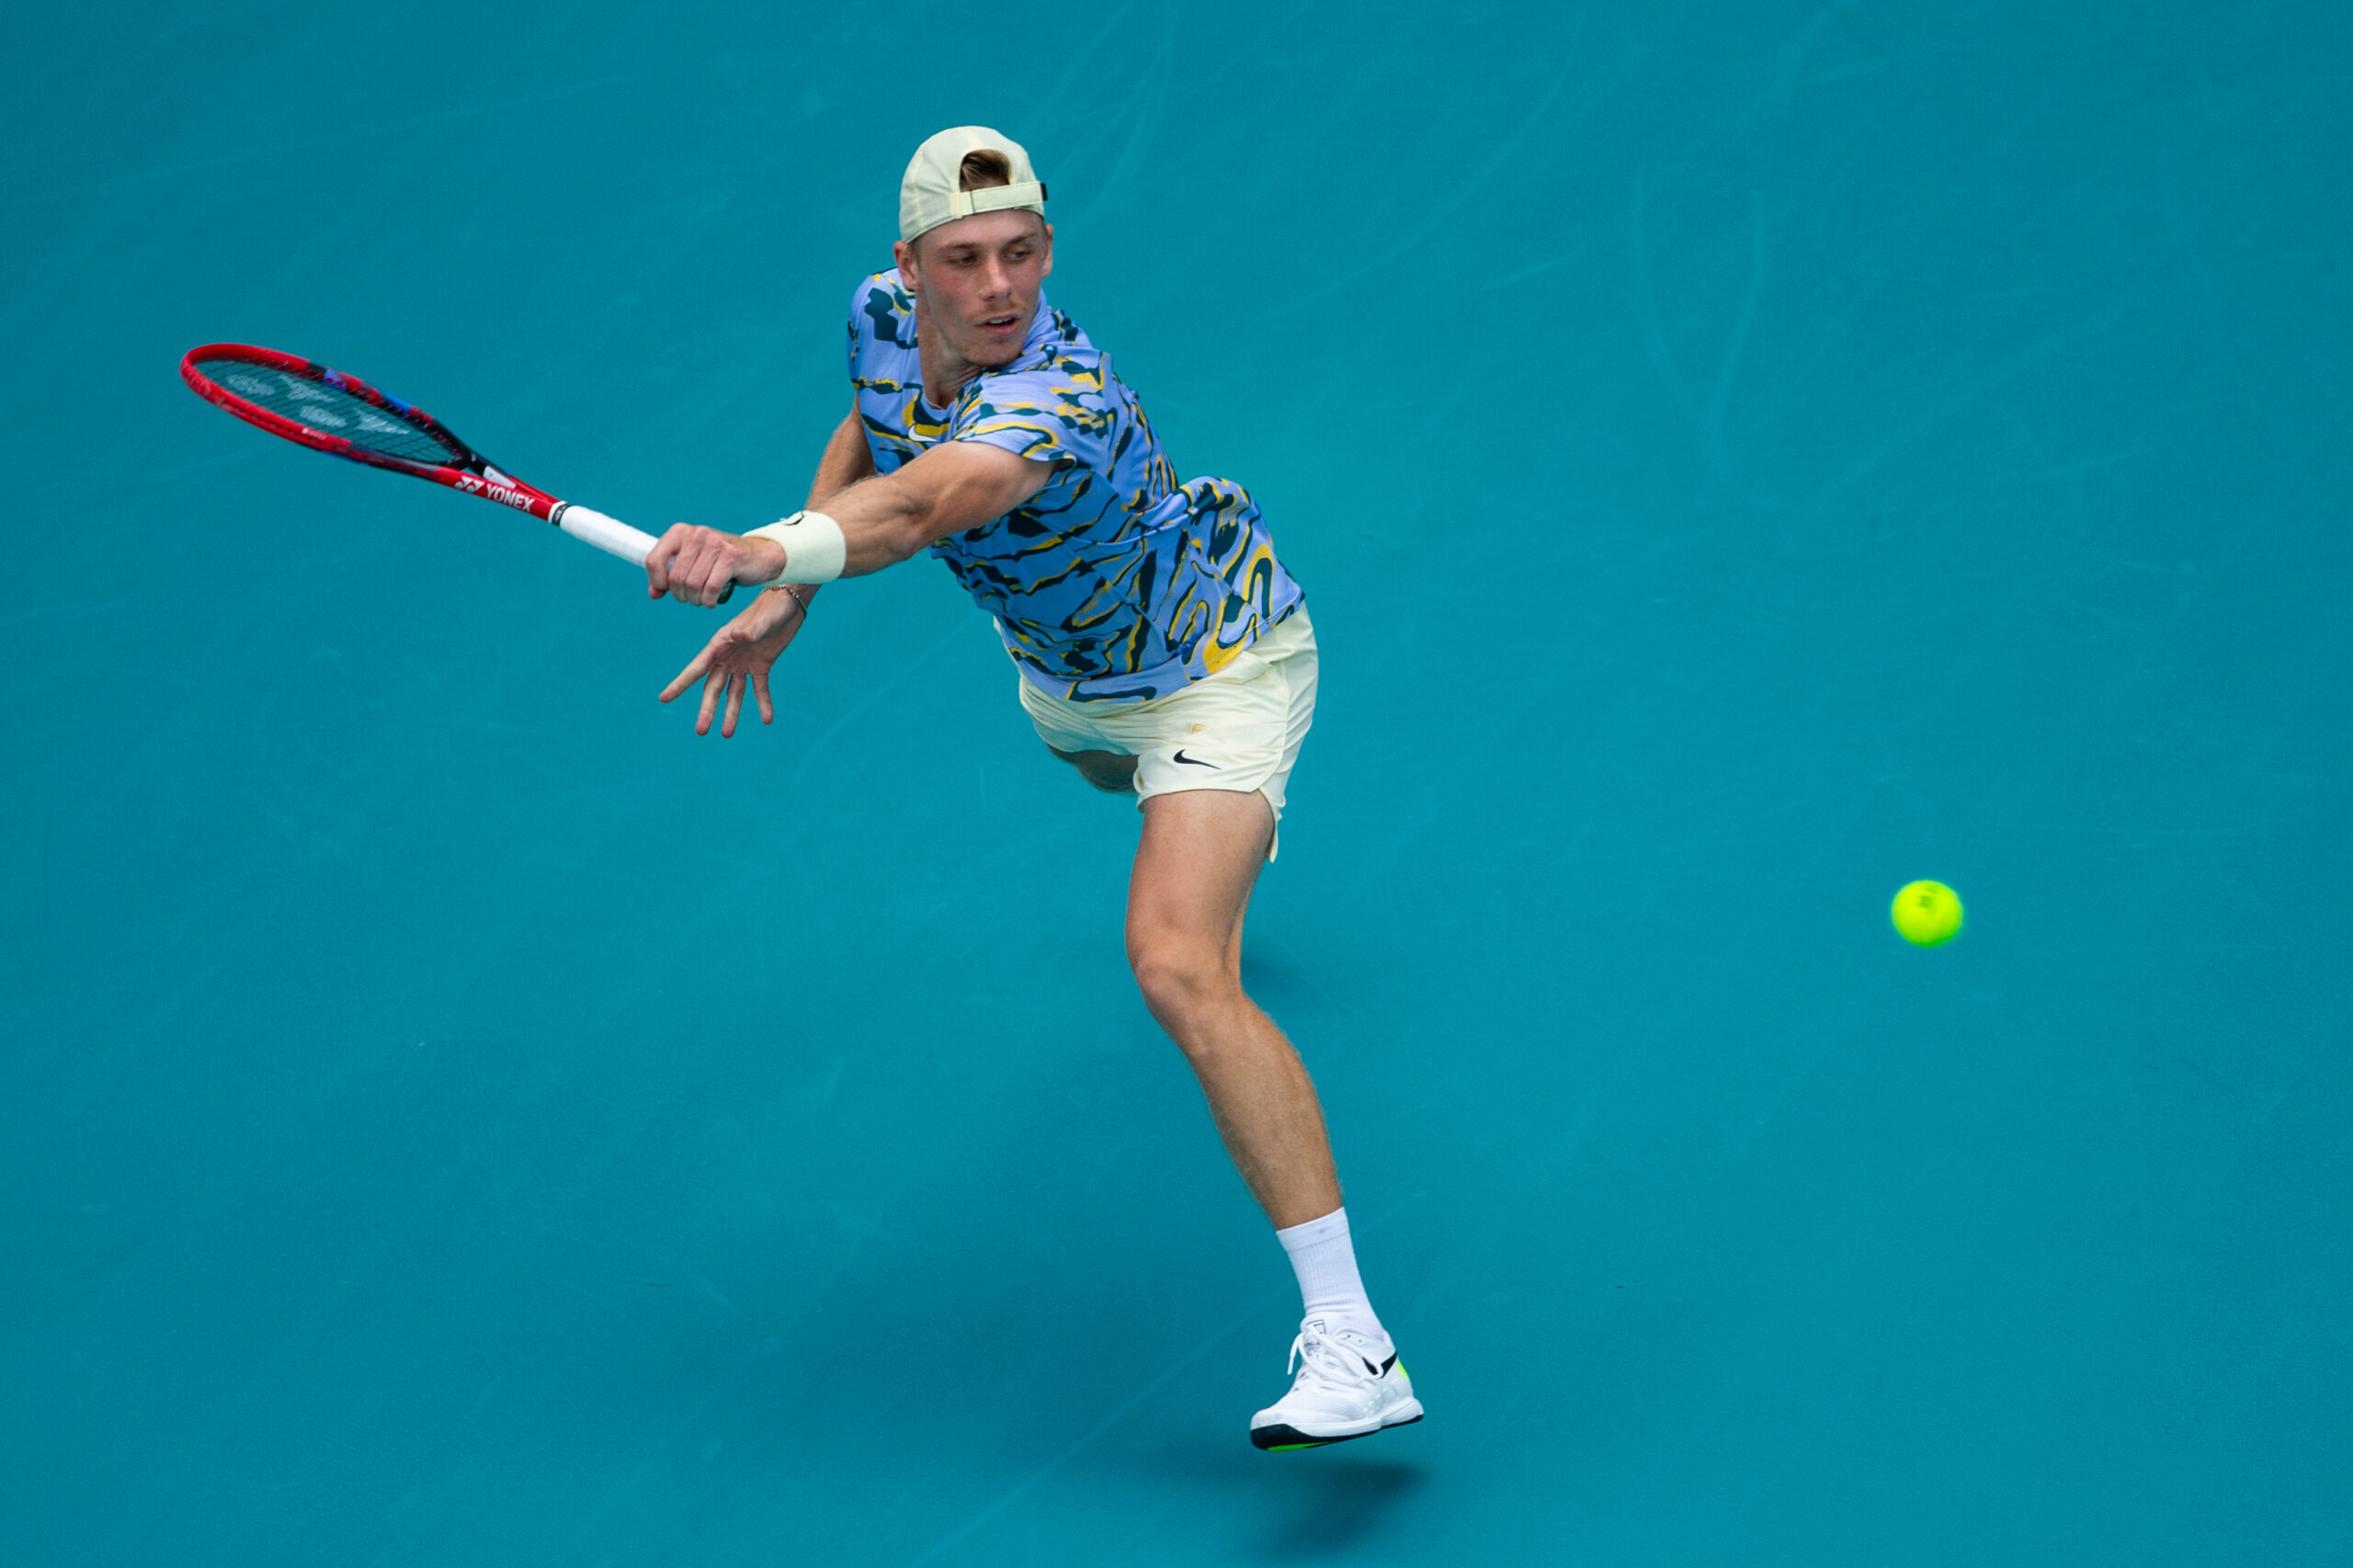 Denis Shapovalov stretches wide during his match against Taylor Fritz at the 2023 Miami Open on March 26